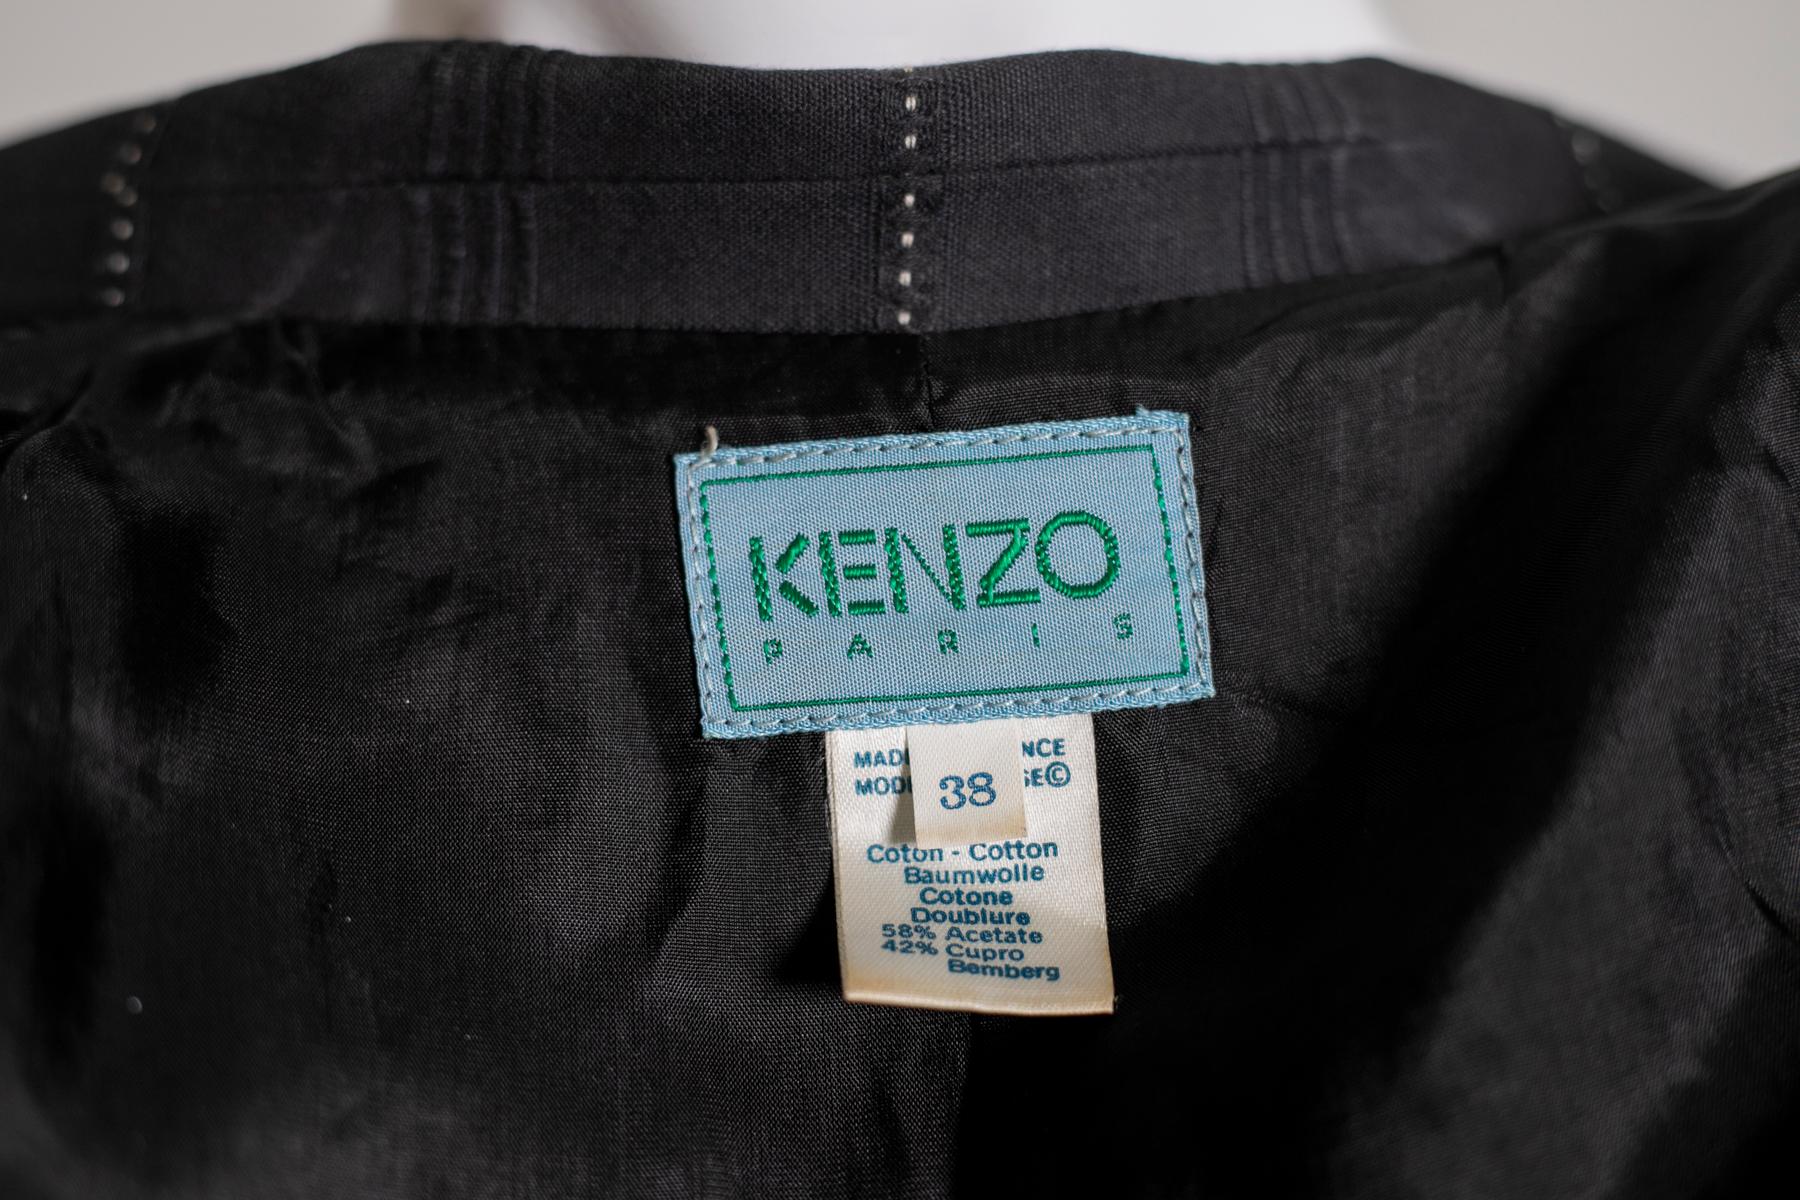 Glittering vintage elegant blazer designed by Kenzo in the 1990s, made in Italy. ORIGINAL LABEL.
The blazer has a classic elegant cut with soft long sleeves and a long stand collar, which closes centrally with 2 large black buttons.
There are two